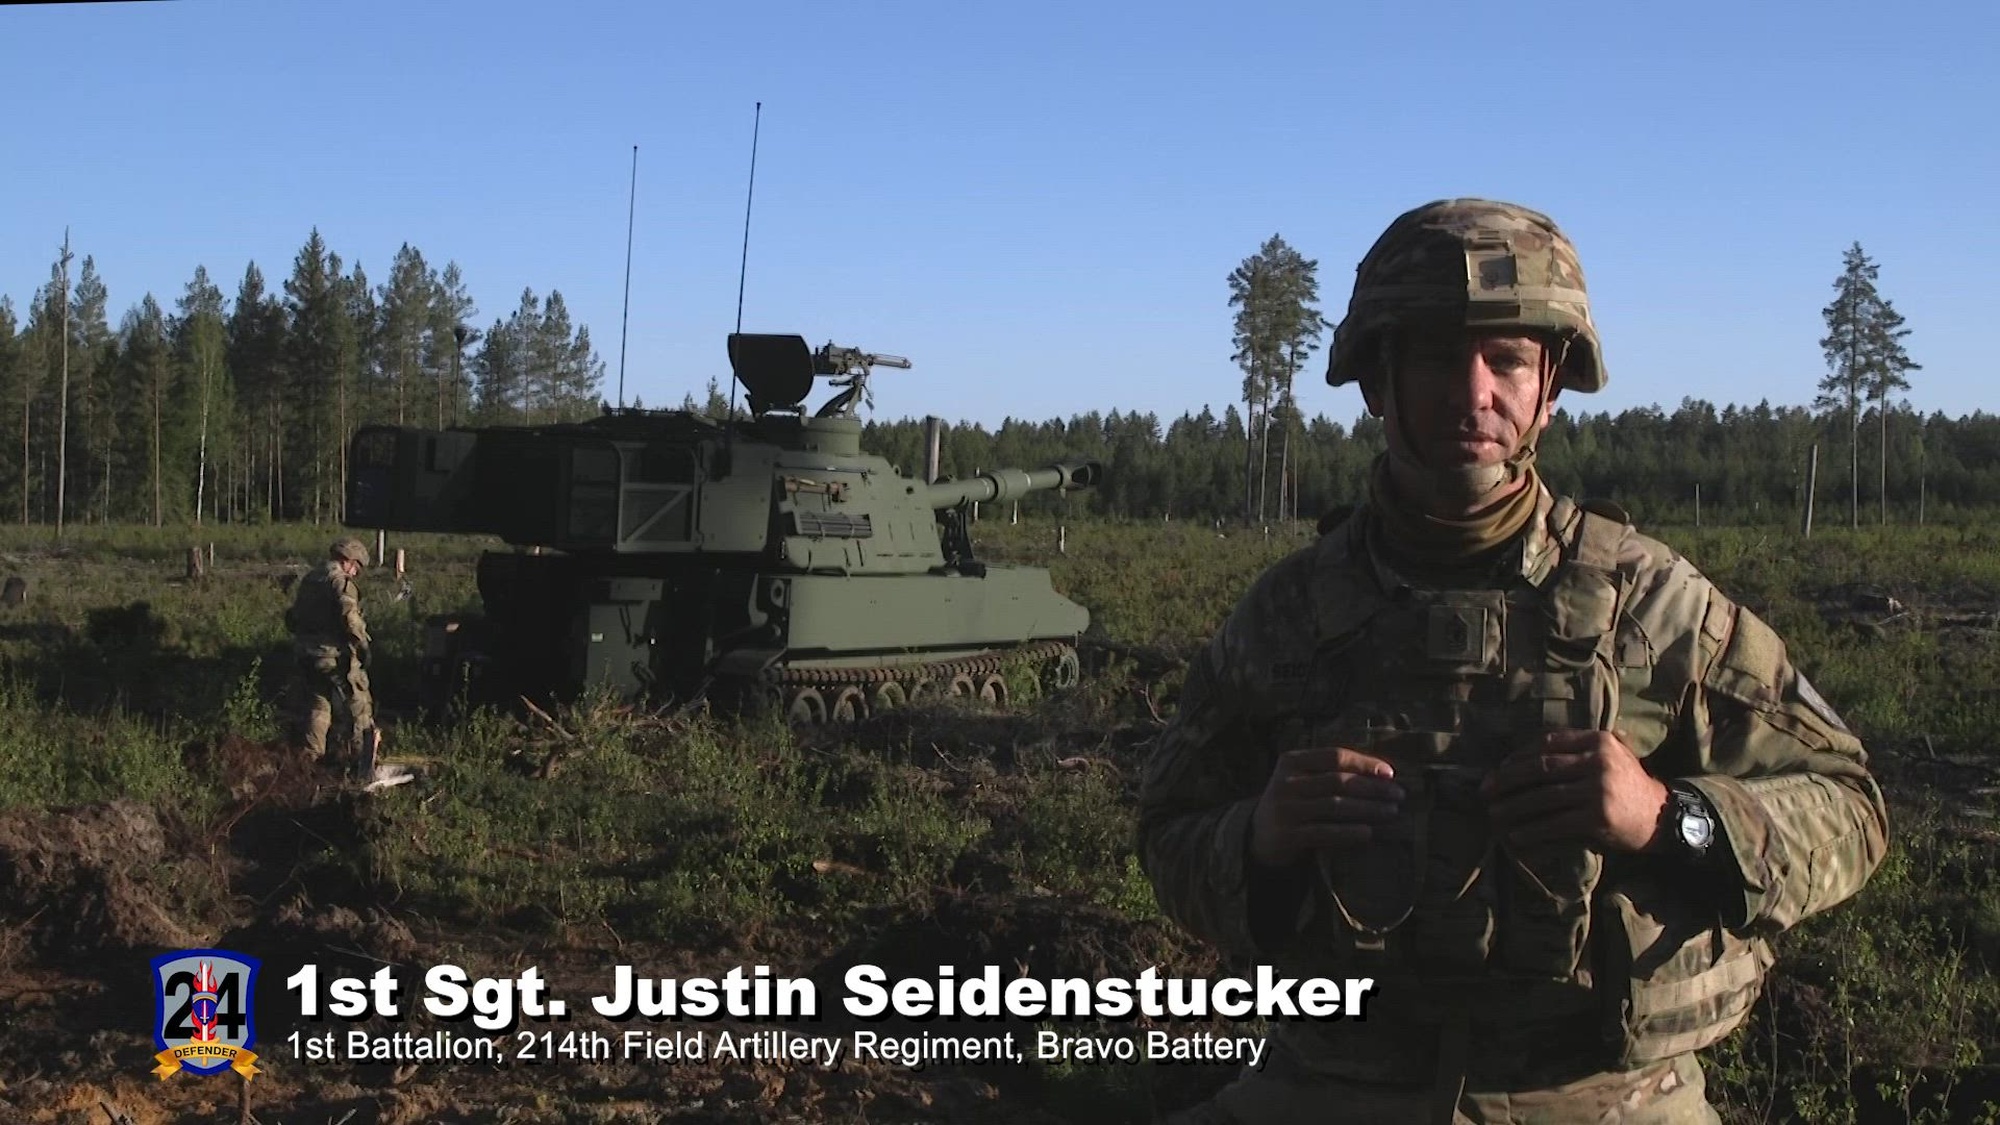 U.S. Army 1st Sgt. Justin Seidenstucker, assigned to the Thomson-based, Bravo Battery, 1st Battalion, 214th Artillery Regiment, 648th Maneuver Enhancement Brigade, Georgia Army National Guard, explains the unit's role during React to Contact exercises during the DEFENDER 24 exercise in Skillingaryd, Sweden on May 7, 2024. DEFENDER 24 is the Dynamic Employment of Forces to Europe for NATO Deterrence and Enhanced Readiness, and is a U.S. European Command scheduled, U.S. Army Europe and Africa conducted exercises that consist of Saber Strike, Immediate Response, Swift Response. DEFENDER 24 is linked to NATO's Steadfast Defender exercise, and DoD's Large Scale Global Exercise, taking place from 28 March to 31 May. DEFENDER 24 is the largest U.S. Army exercise in Europe and includes more than 17,000 U.S. and 23,000 multinational service members from more than 20 Allied and partner nations, including Croatia, Czechia, Denmark, Estonia, Finland, France, Germany, Georgia, Hungary, Italy, Latvia, Lithuania, Moldova, Netherlands, North Macedonia, Norway, Poland, Romania, Slovakia, Spain, Sweden, and the United Kingdom. (Army video by Spc. Ehron Ostendorf and Sgt. Jaylan Caulton)